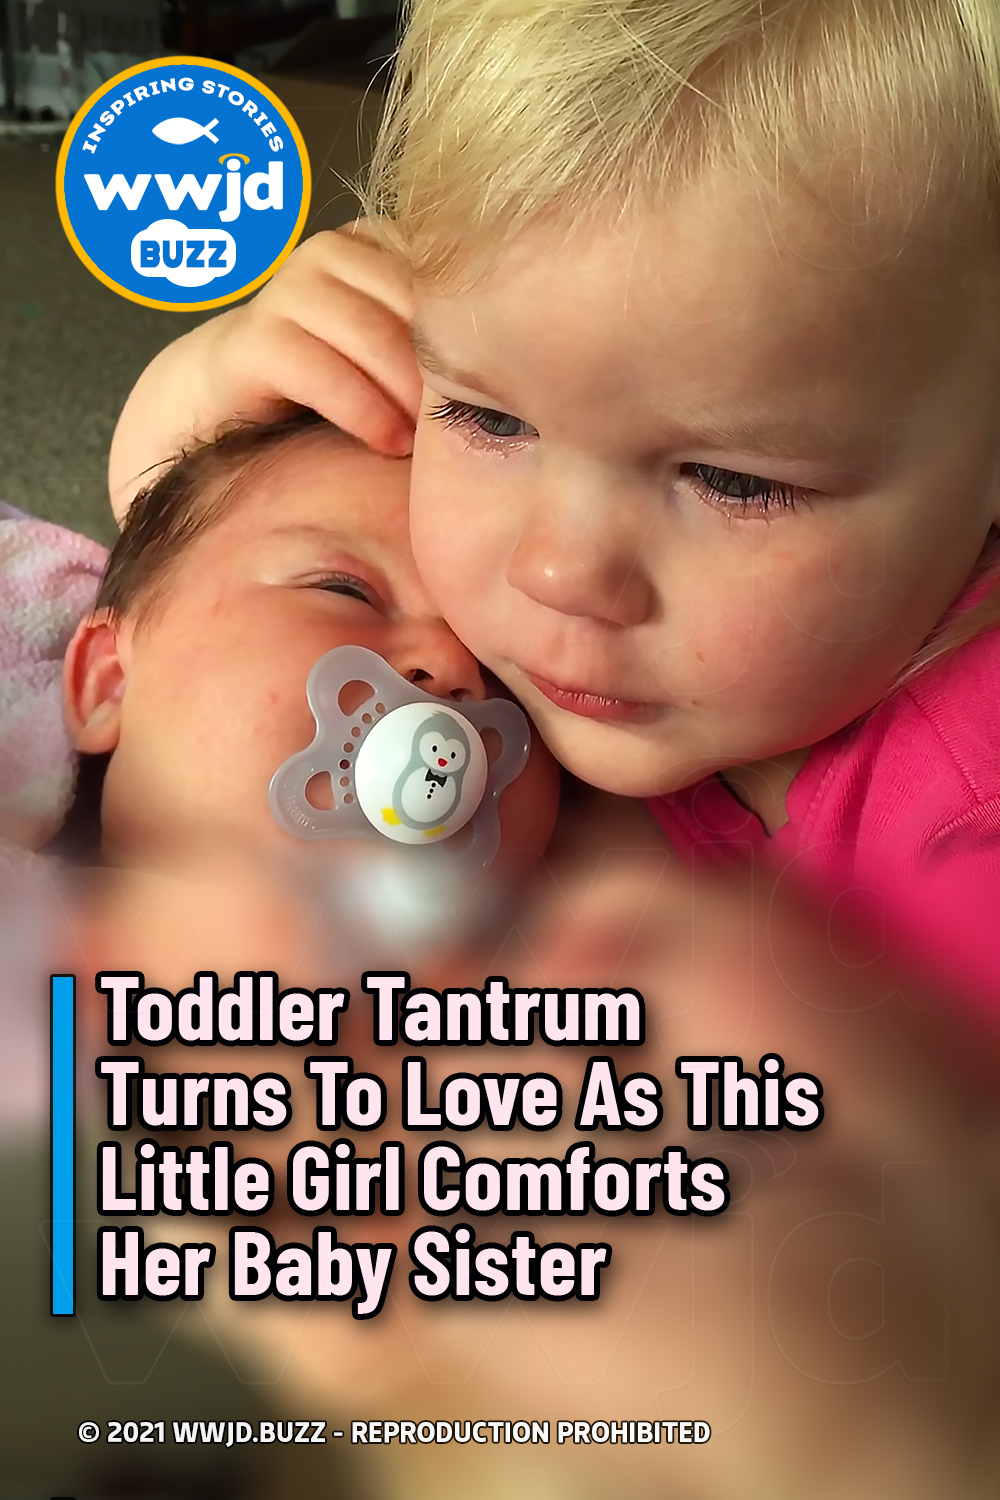 Toddler Tantrum Turns To Love As This Little Girl Comforts Her Baby Sister